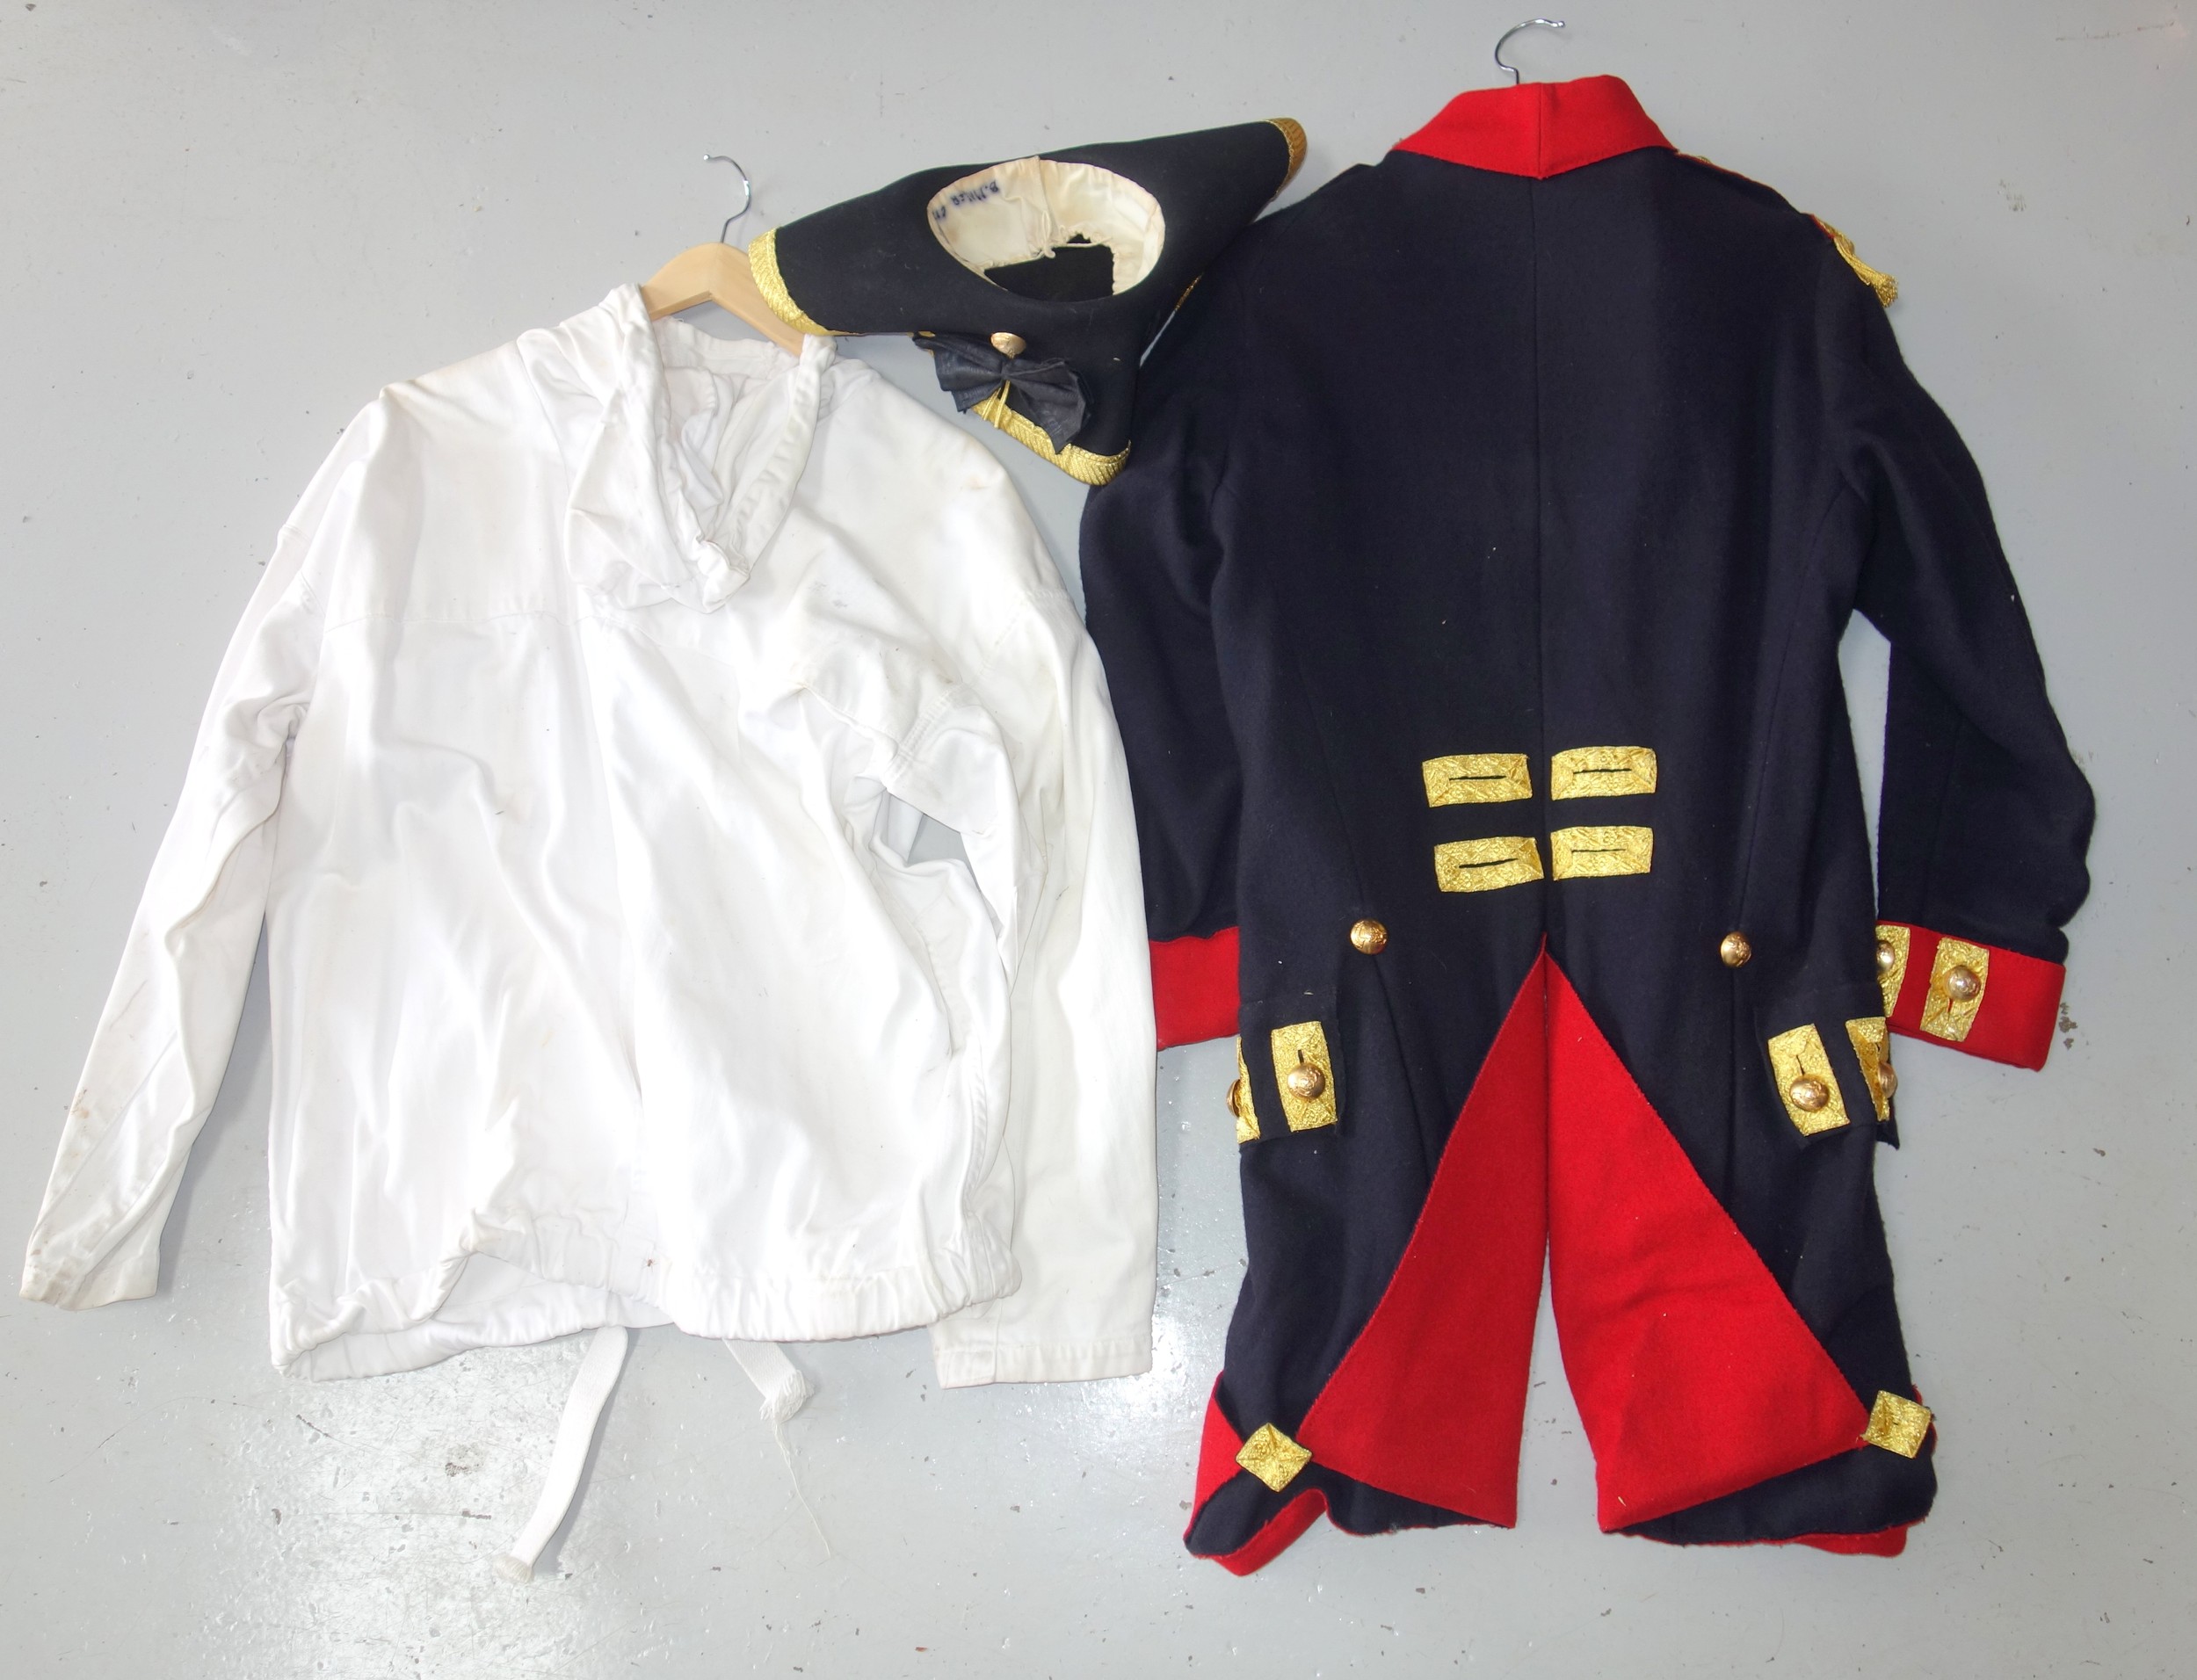 18th century style soldiers tunic, with red and gilt appliques and brass buttons, tricorn hat, - Image 2 of 5